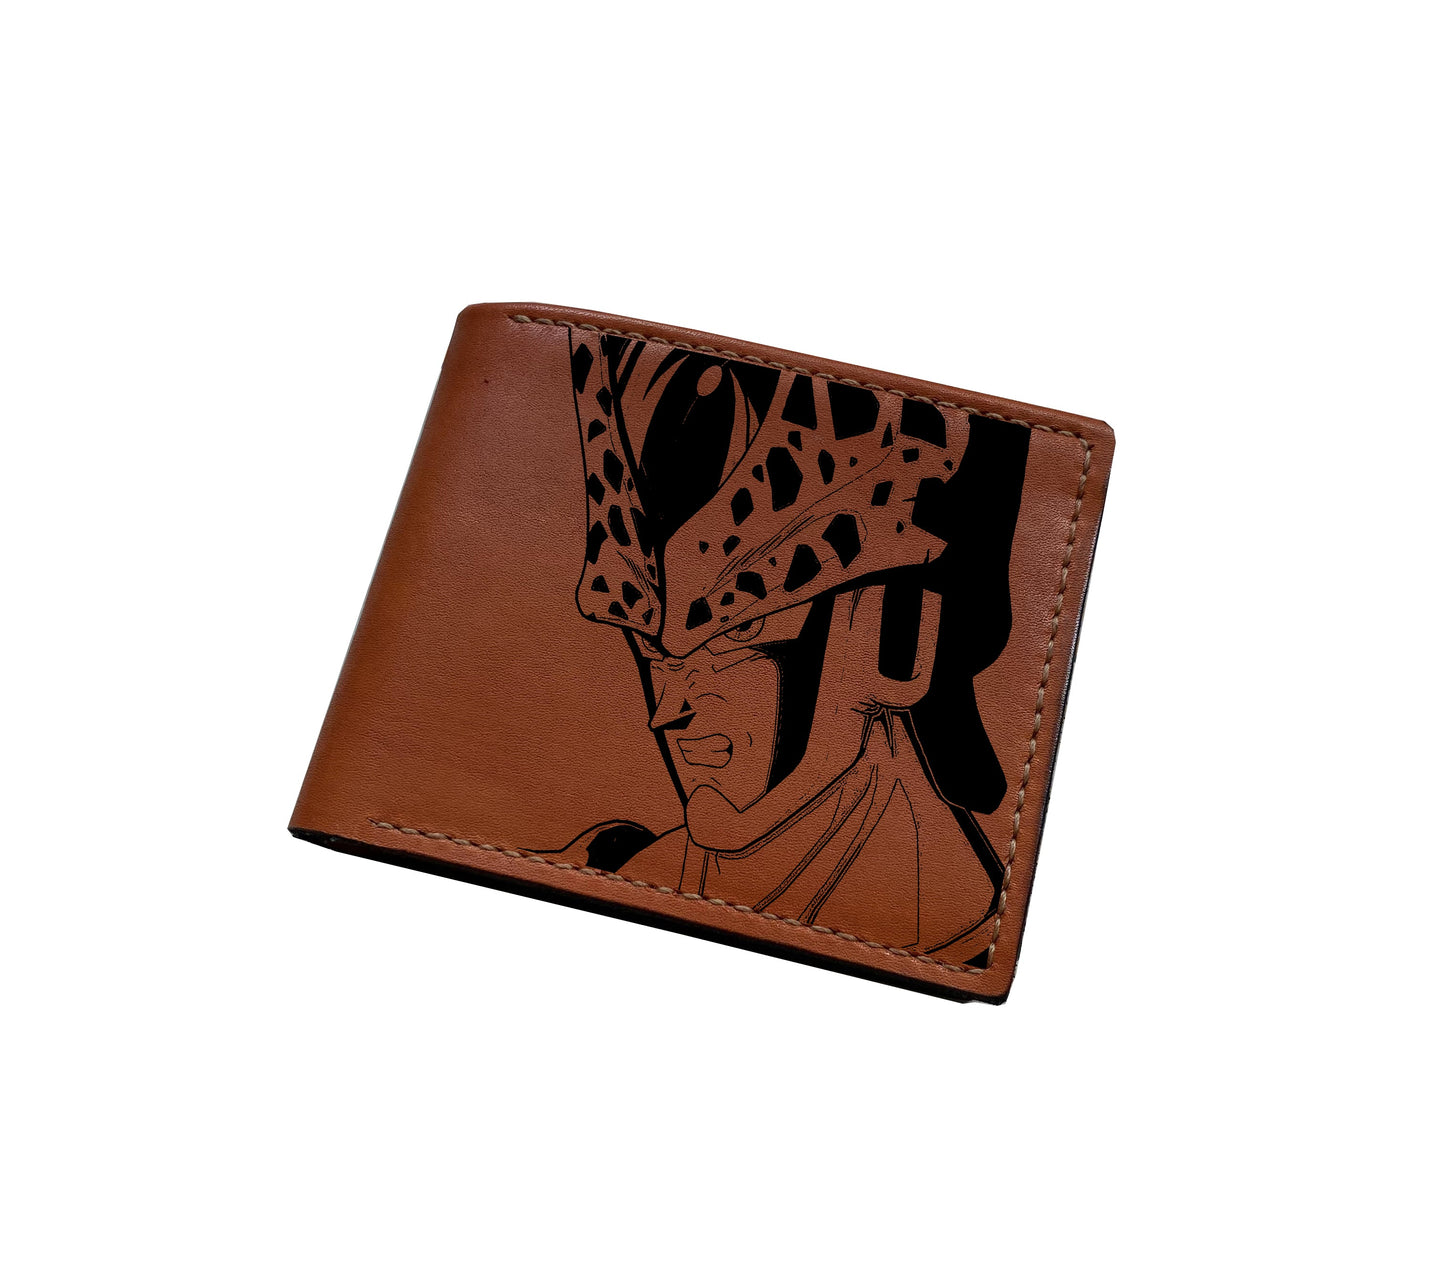 Mayan Corner - Dragon ball characters drawing leather wallet, fan art leather gift for men, wallet for him, leather anniversary present ideas -  Future Frieza